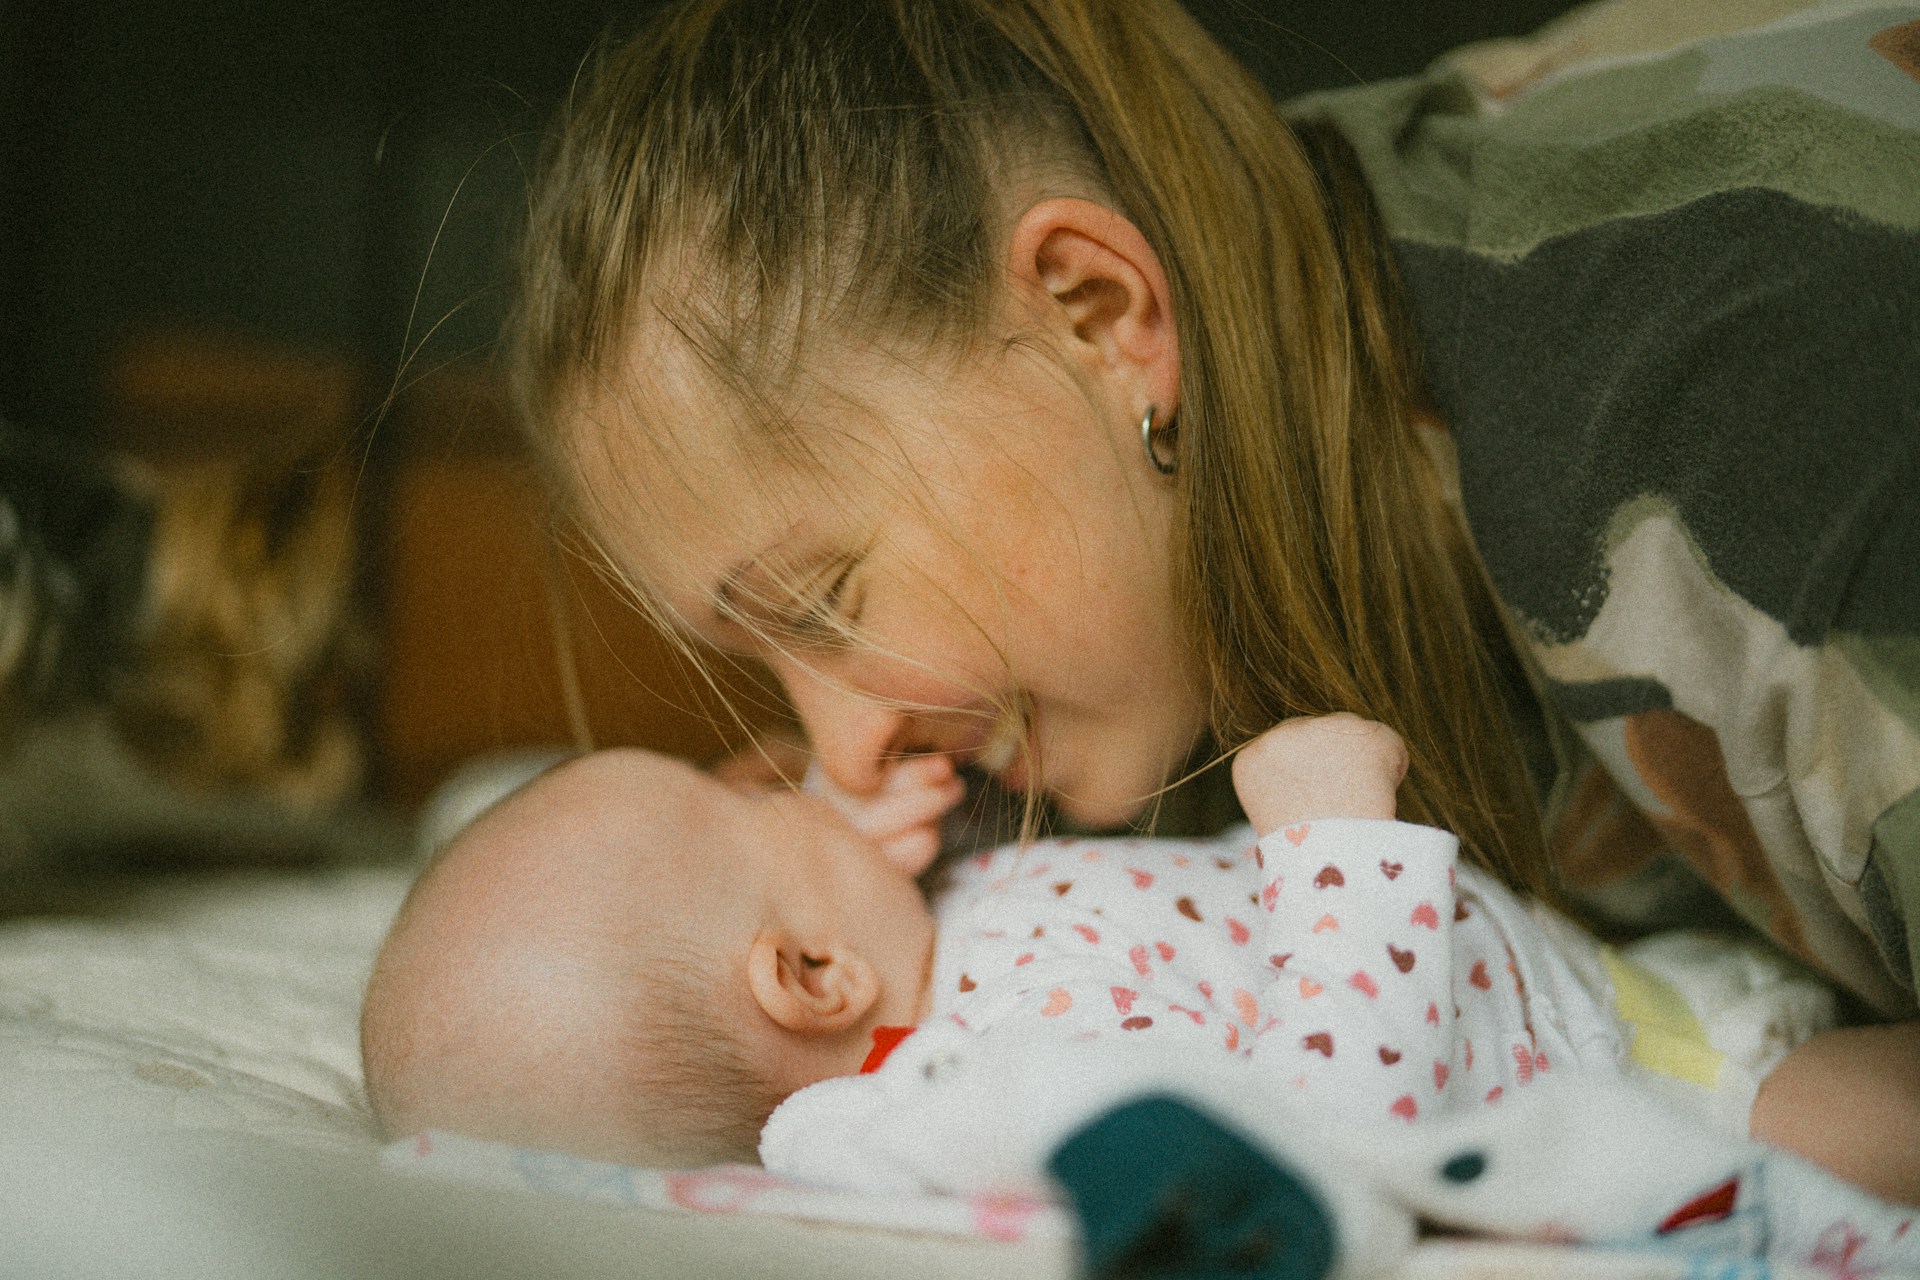 Seeing my wife become a mother gave me a newfound appreciation for a mother’s selfless love